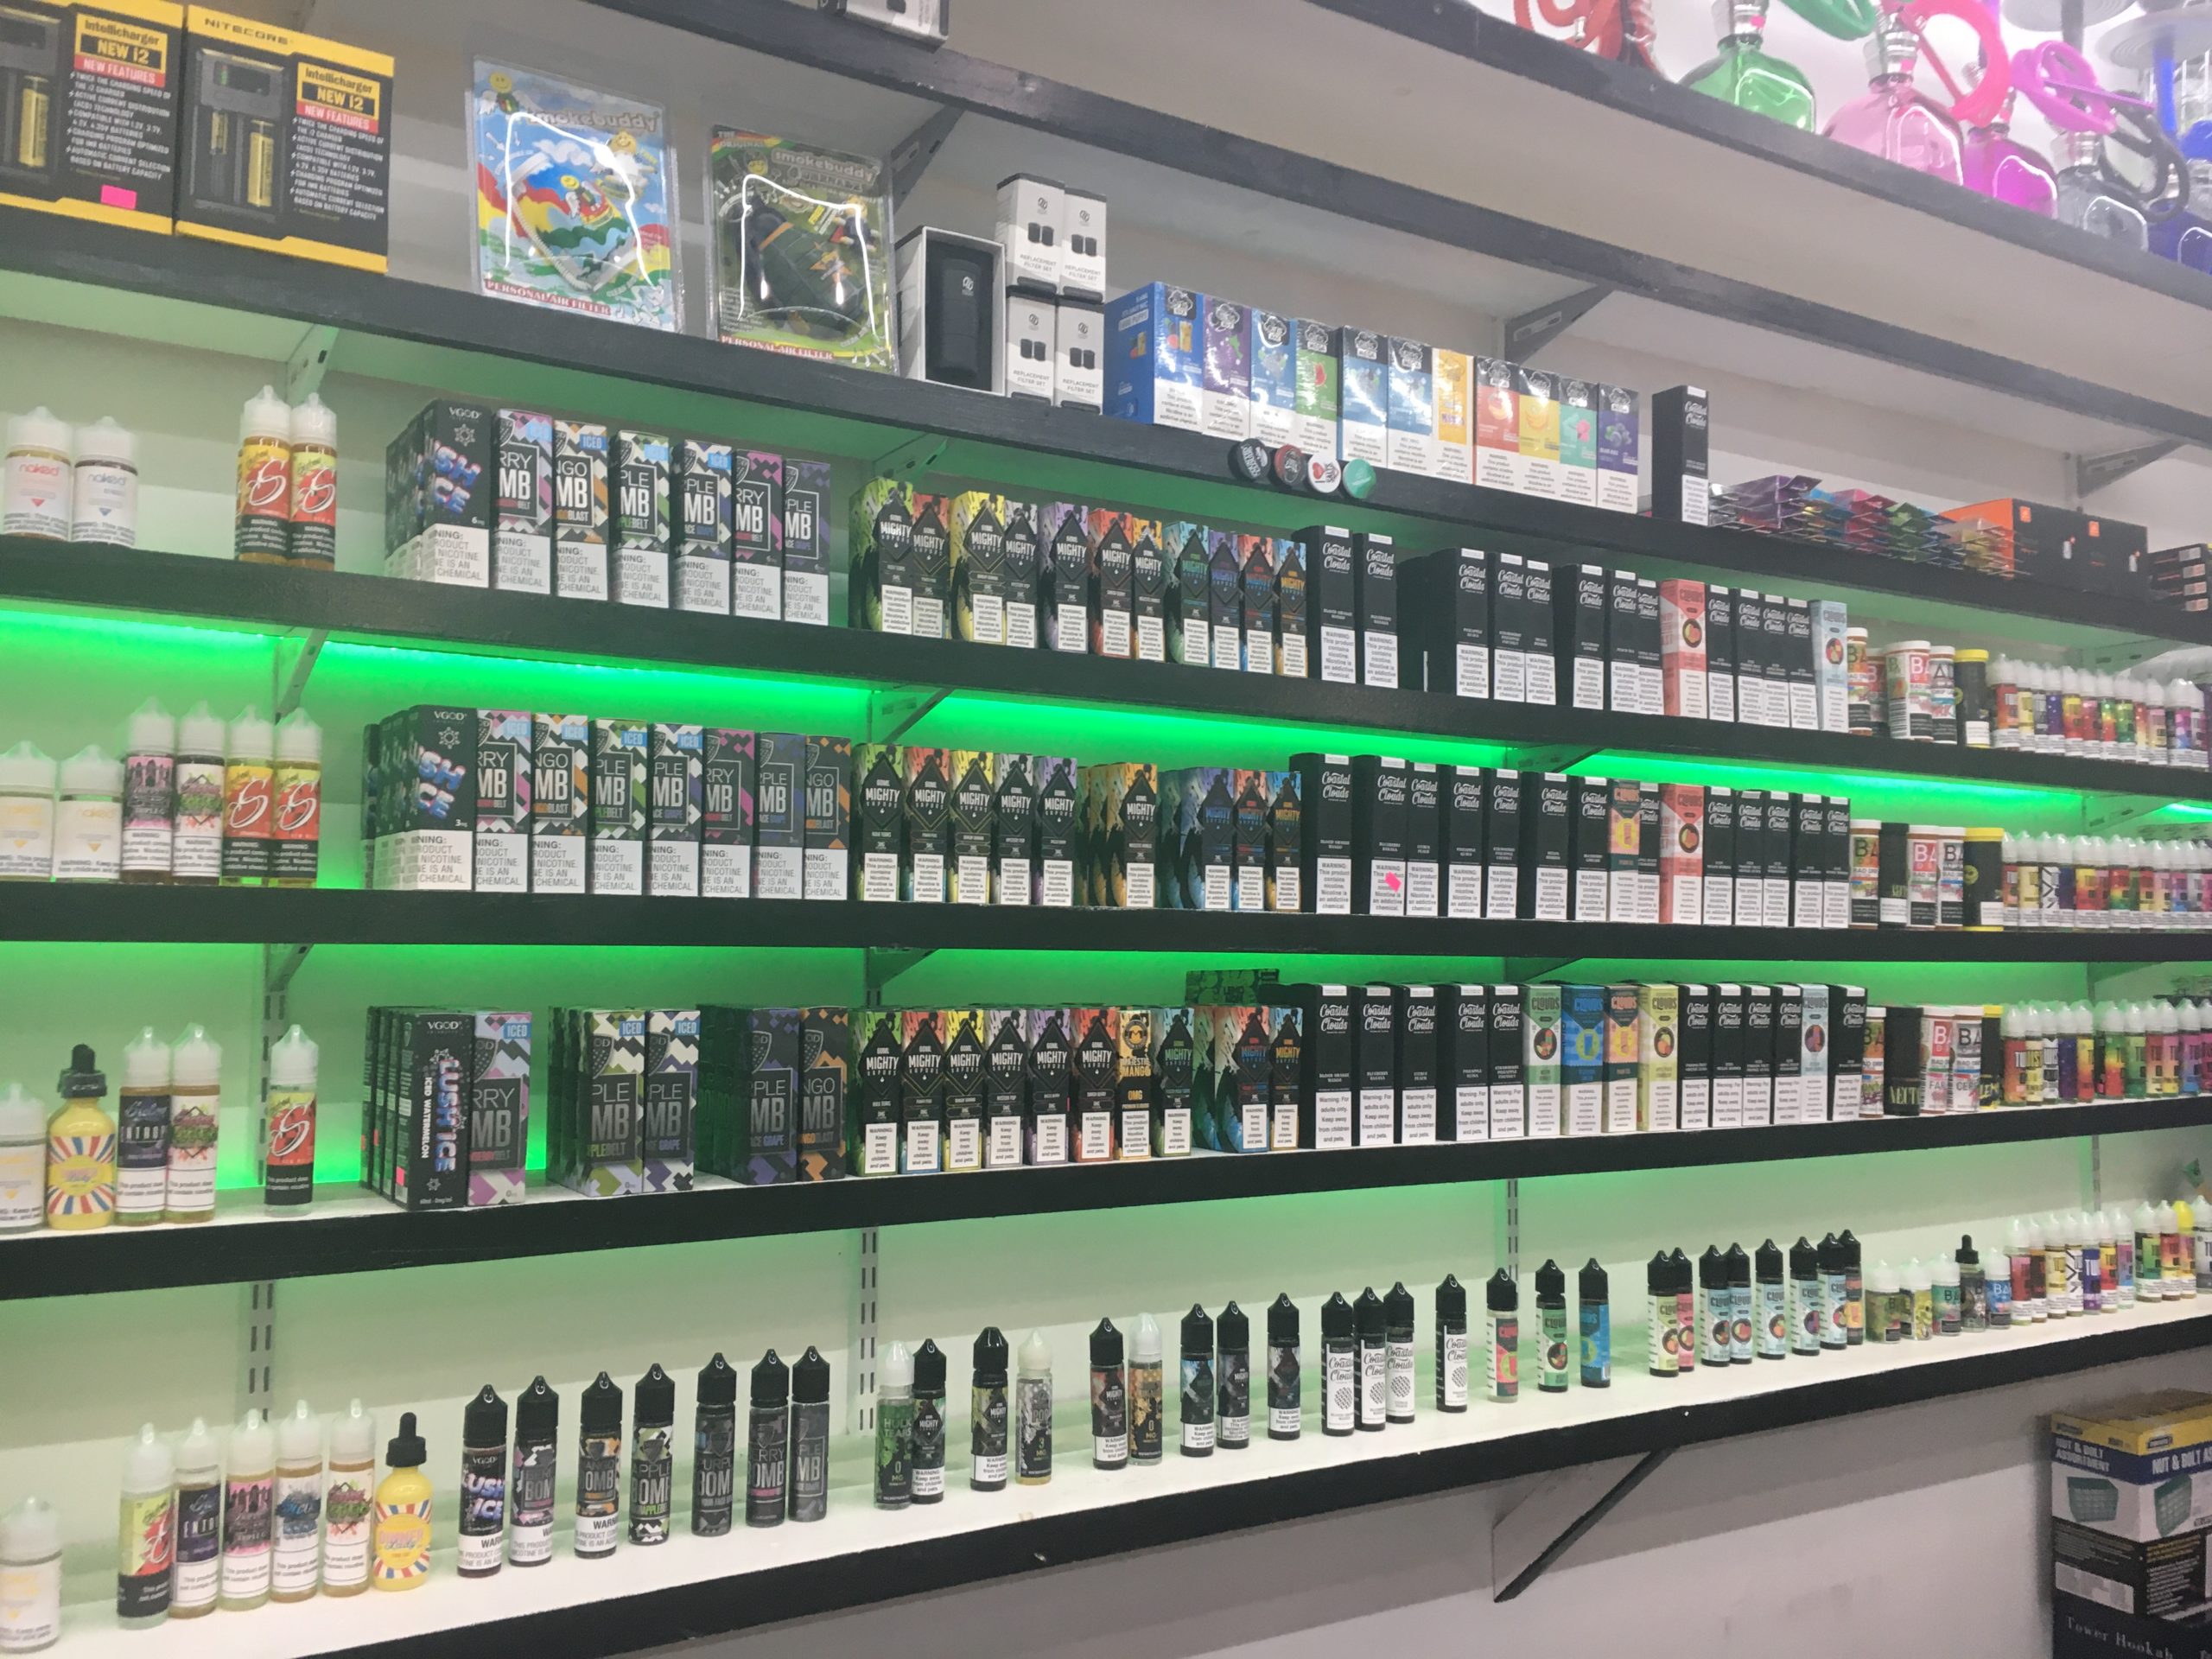 Finance Committee keeps menthol cigarettes, moves forward with flavored vape ban